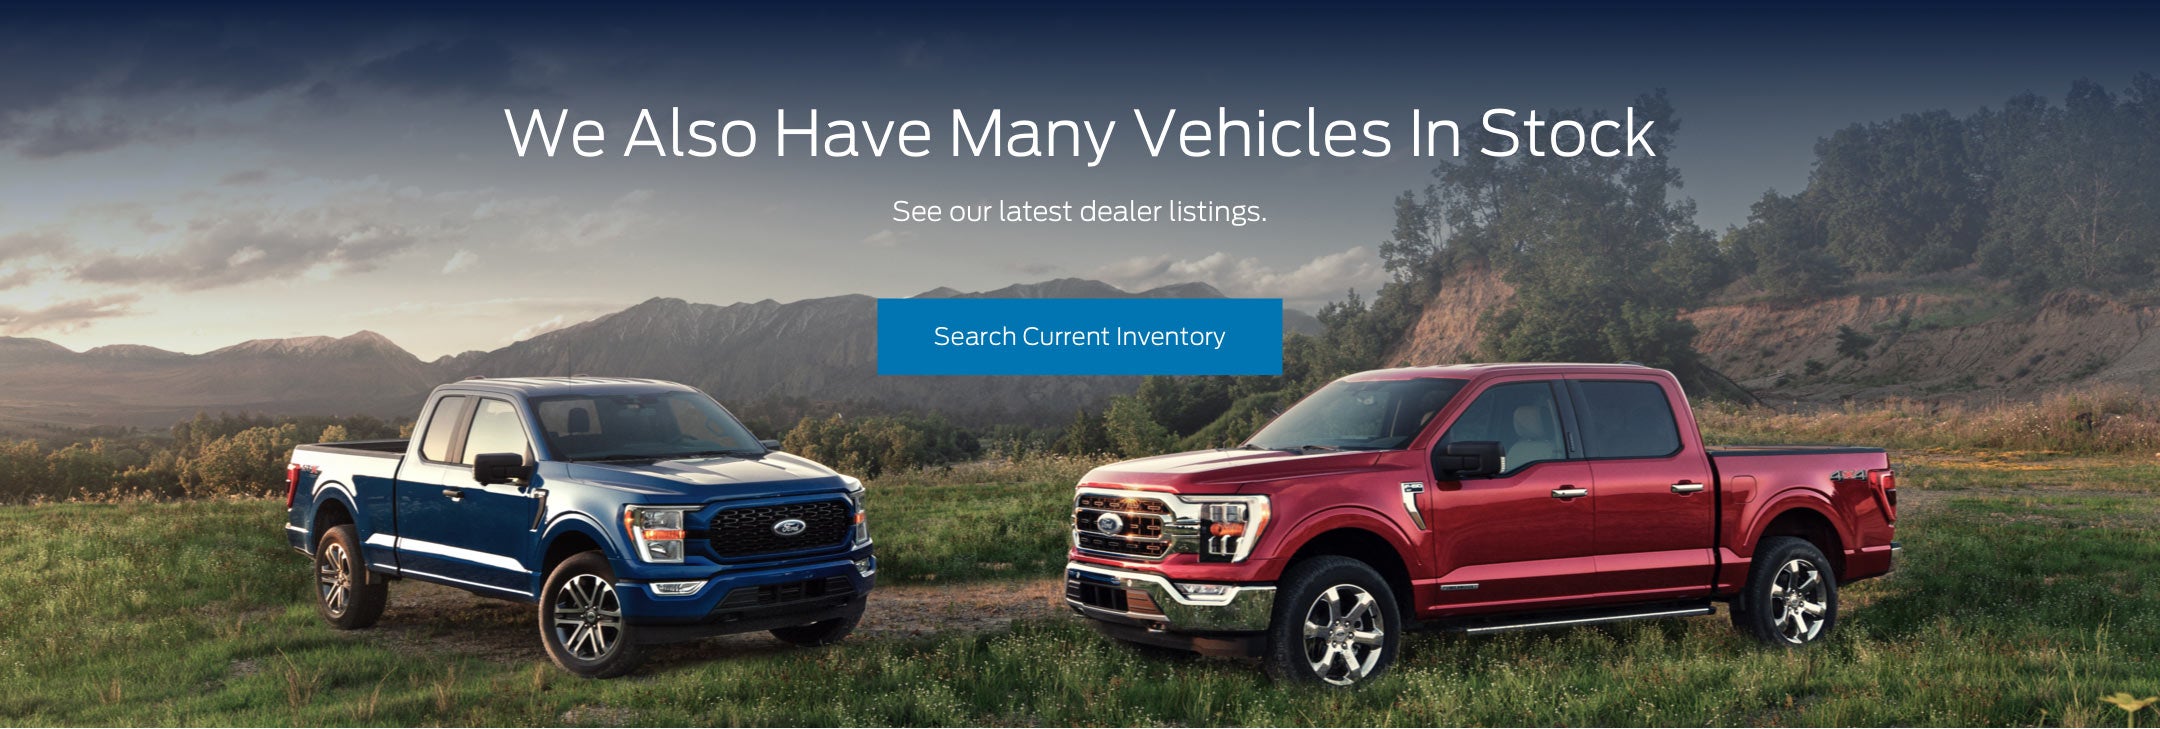 Ford vehicles in stock | Parrish Ford in Goochland VA